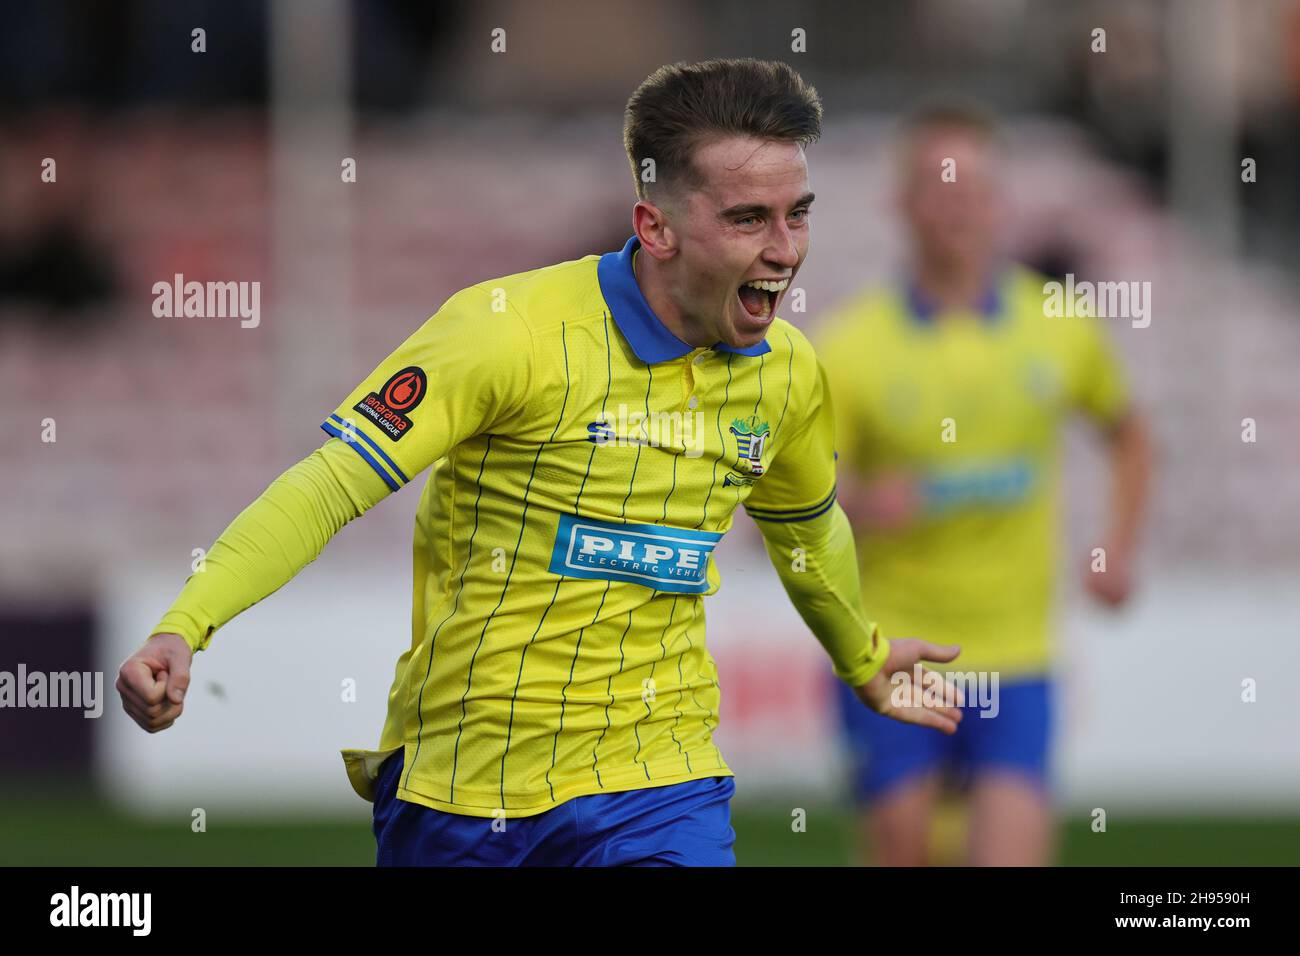 SOLIHULL, ENGLAND. DECEMBER 4TH 2021. Joe Sbarra of Solihull Moors celebrates after scoring their teams first goal during the Vanarama National League match between Solihull Moors and Woking FC at the Armco Stadium, Solihull on Saturday 4th December 2021. (Credit: James Holyoak/Alamy Live News) Stock Photo